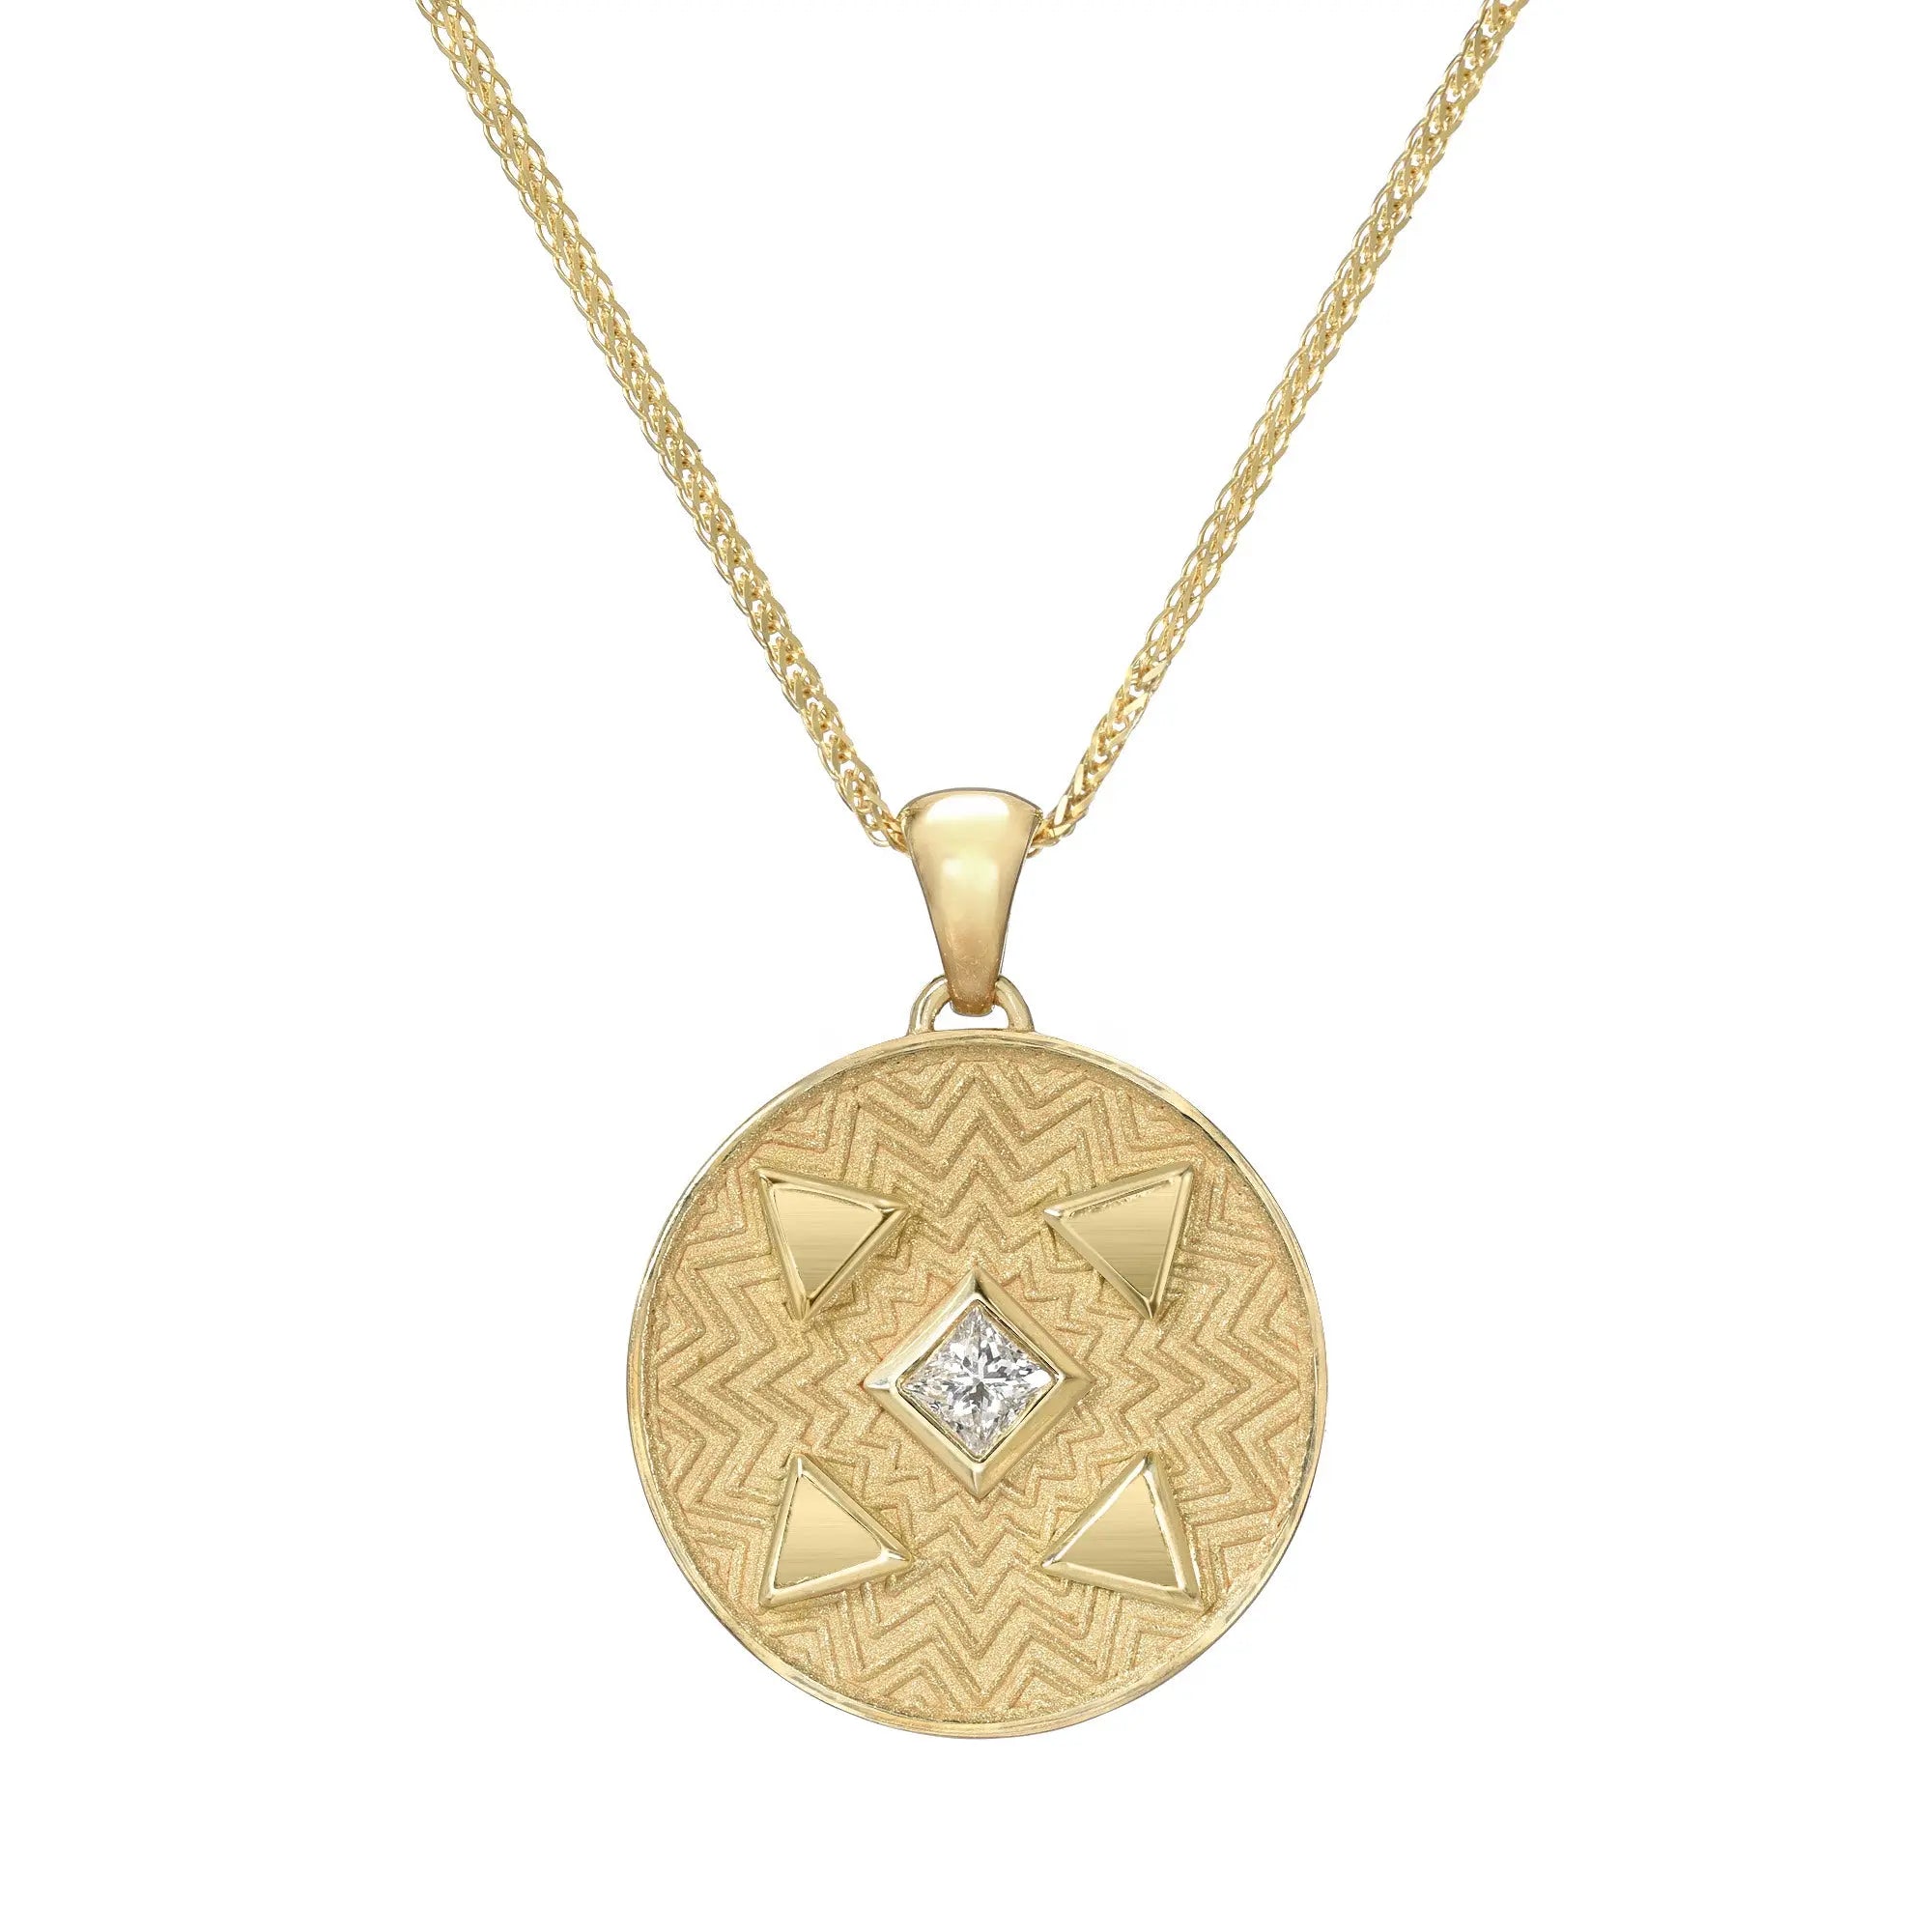 Vibrant texture and bezels extend from the center of this medallion. This piece is a mix of matte and high polish and has "Pure Energy"  engraved on the back. Designed my Meredith Young